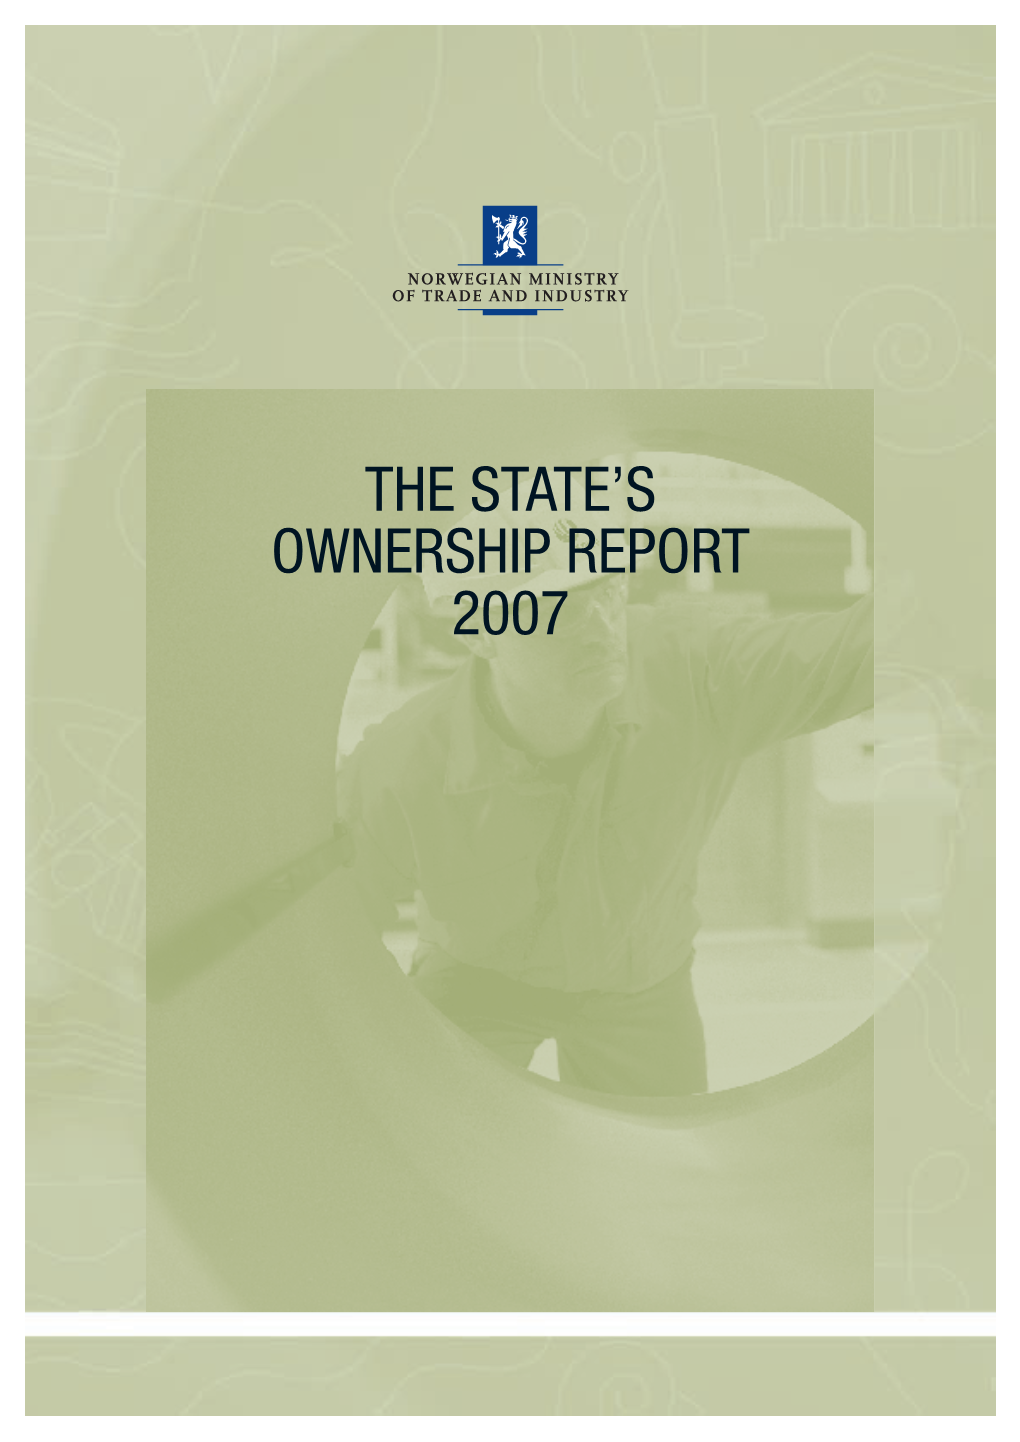 The State's Ownership Report 2007